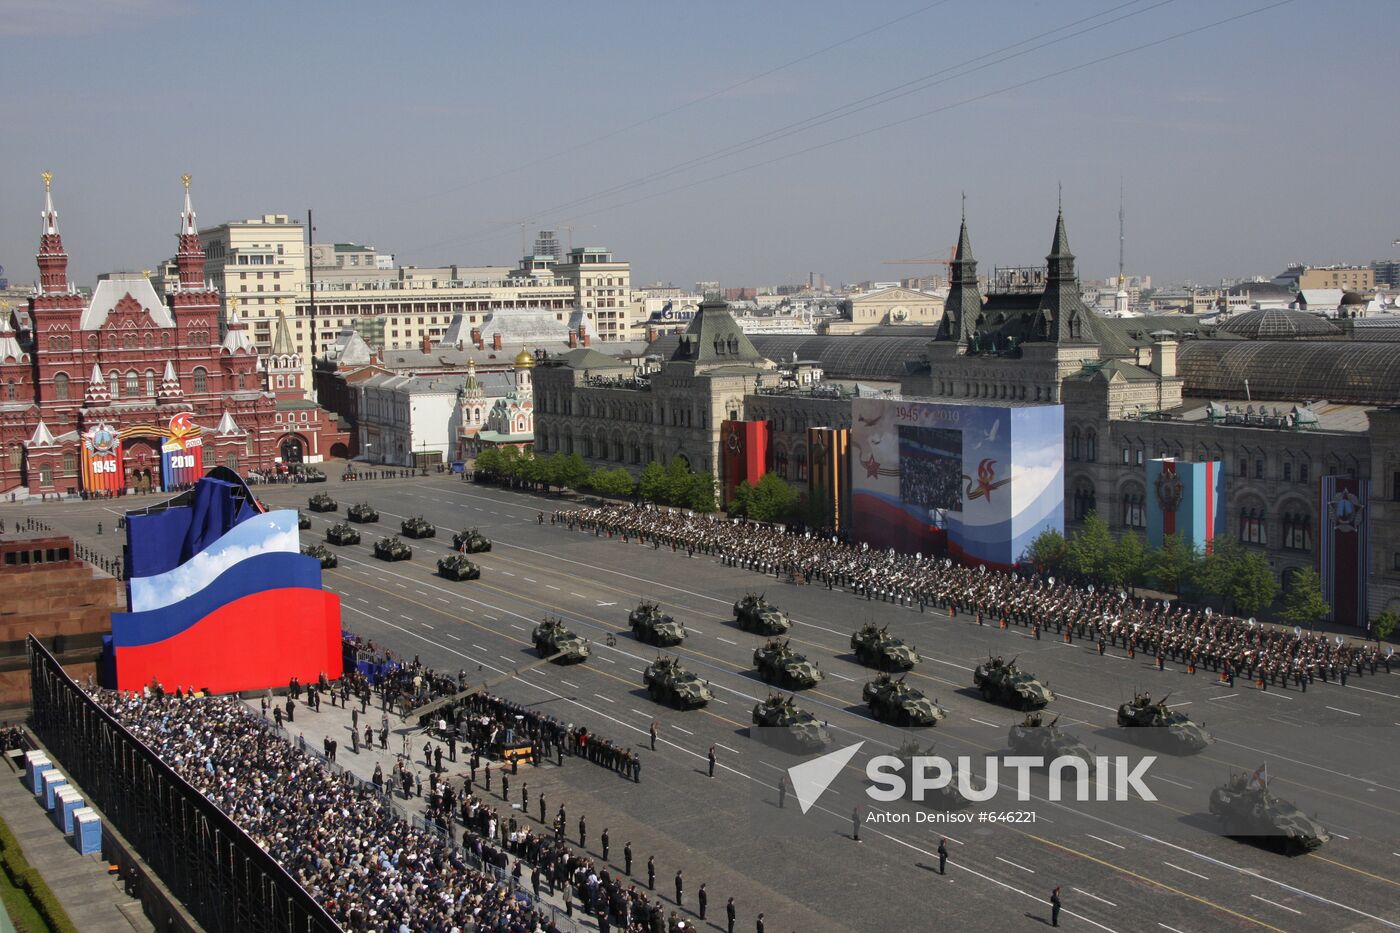 Military parade on 65th anniversary of WWII Victory